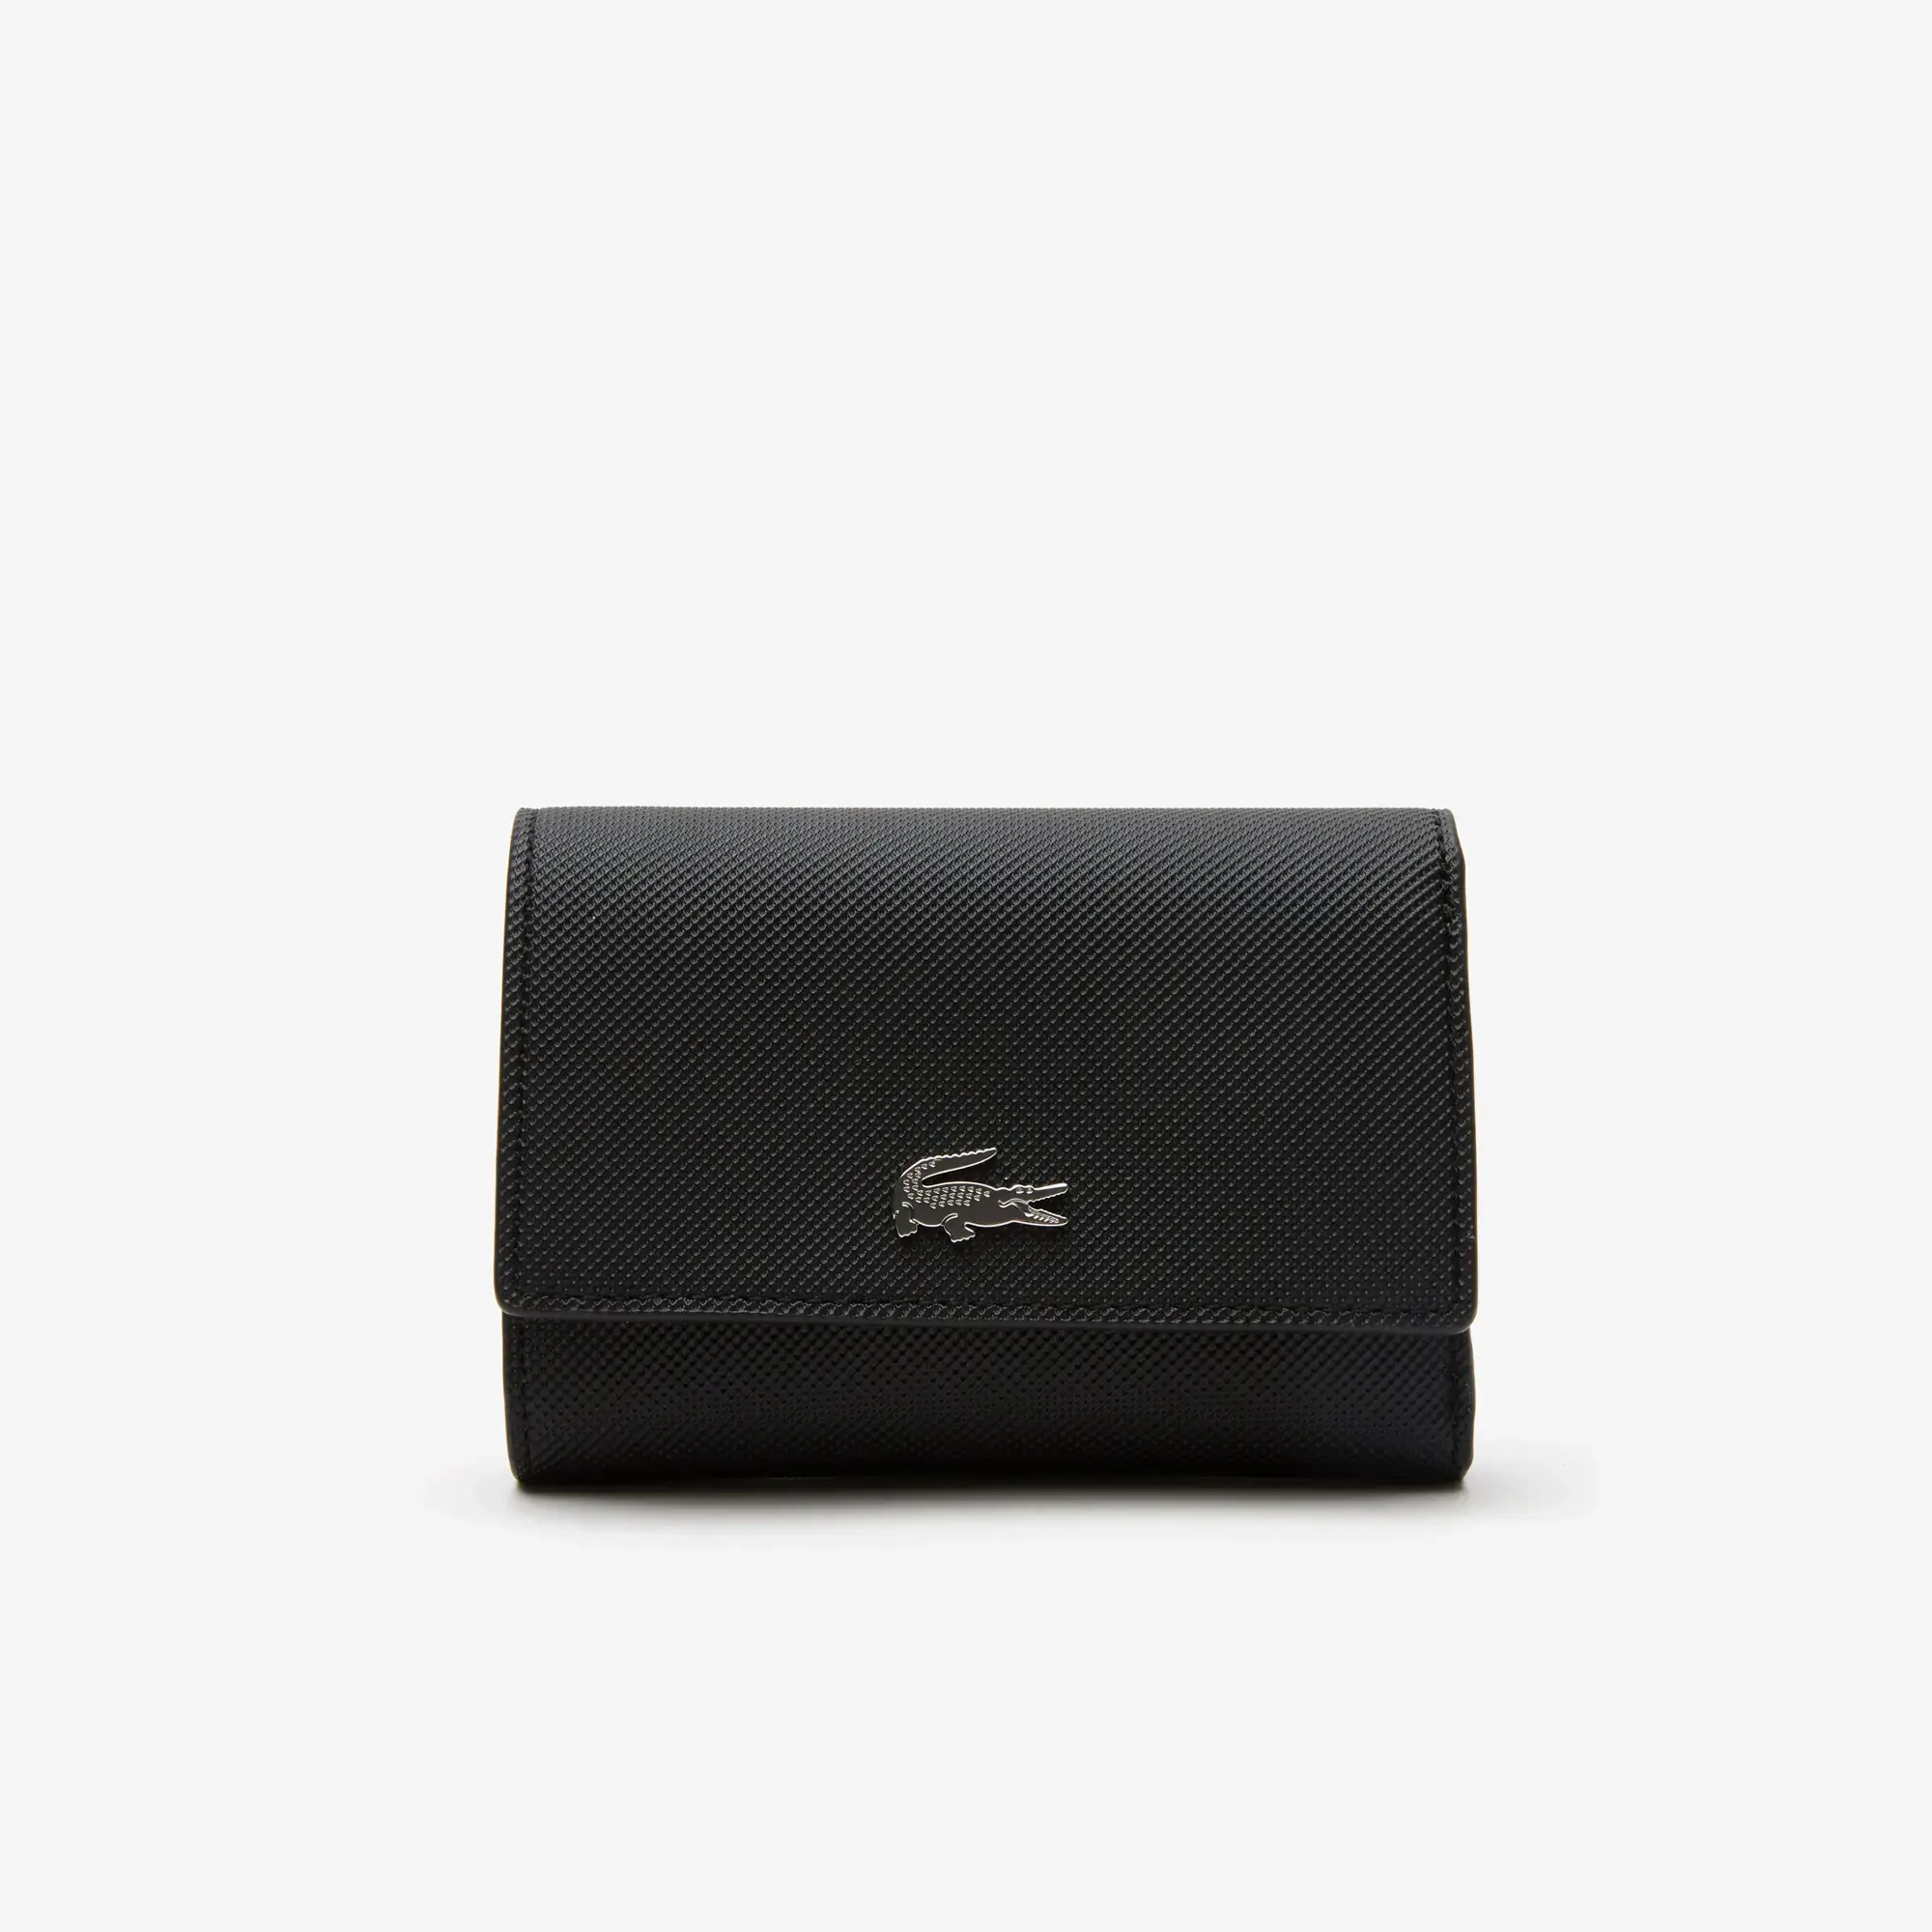 Lacoste Women’s Anna Snap Front Wallet. 1